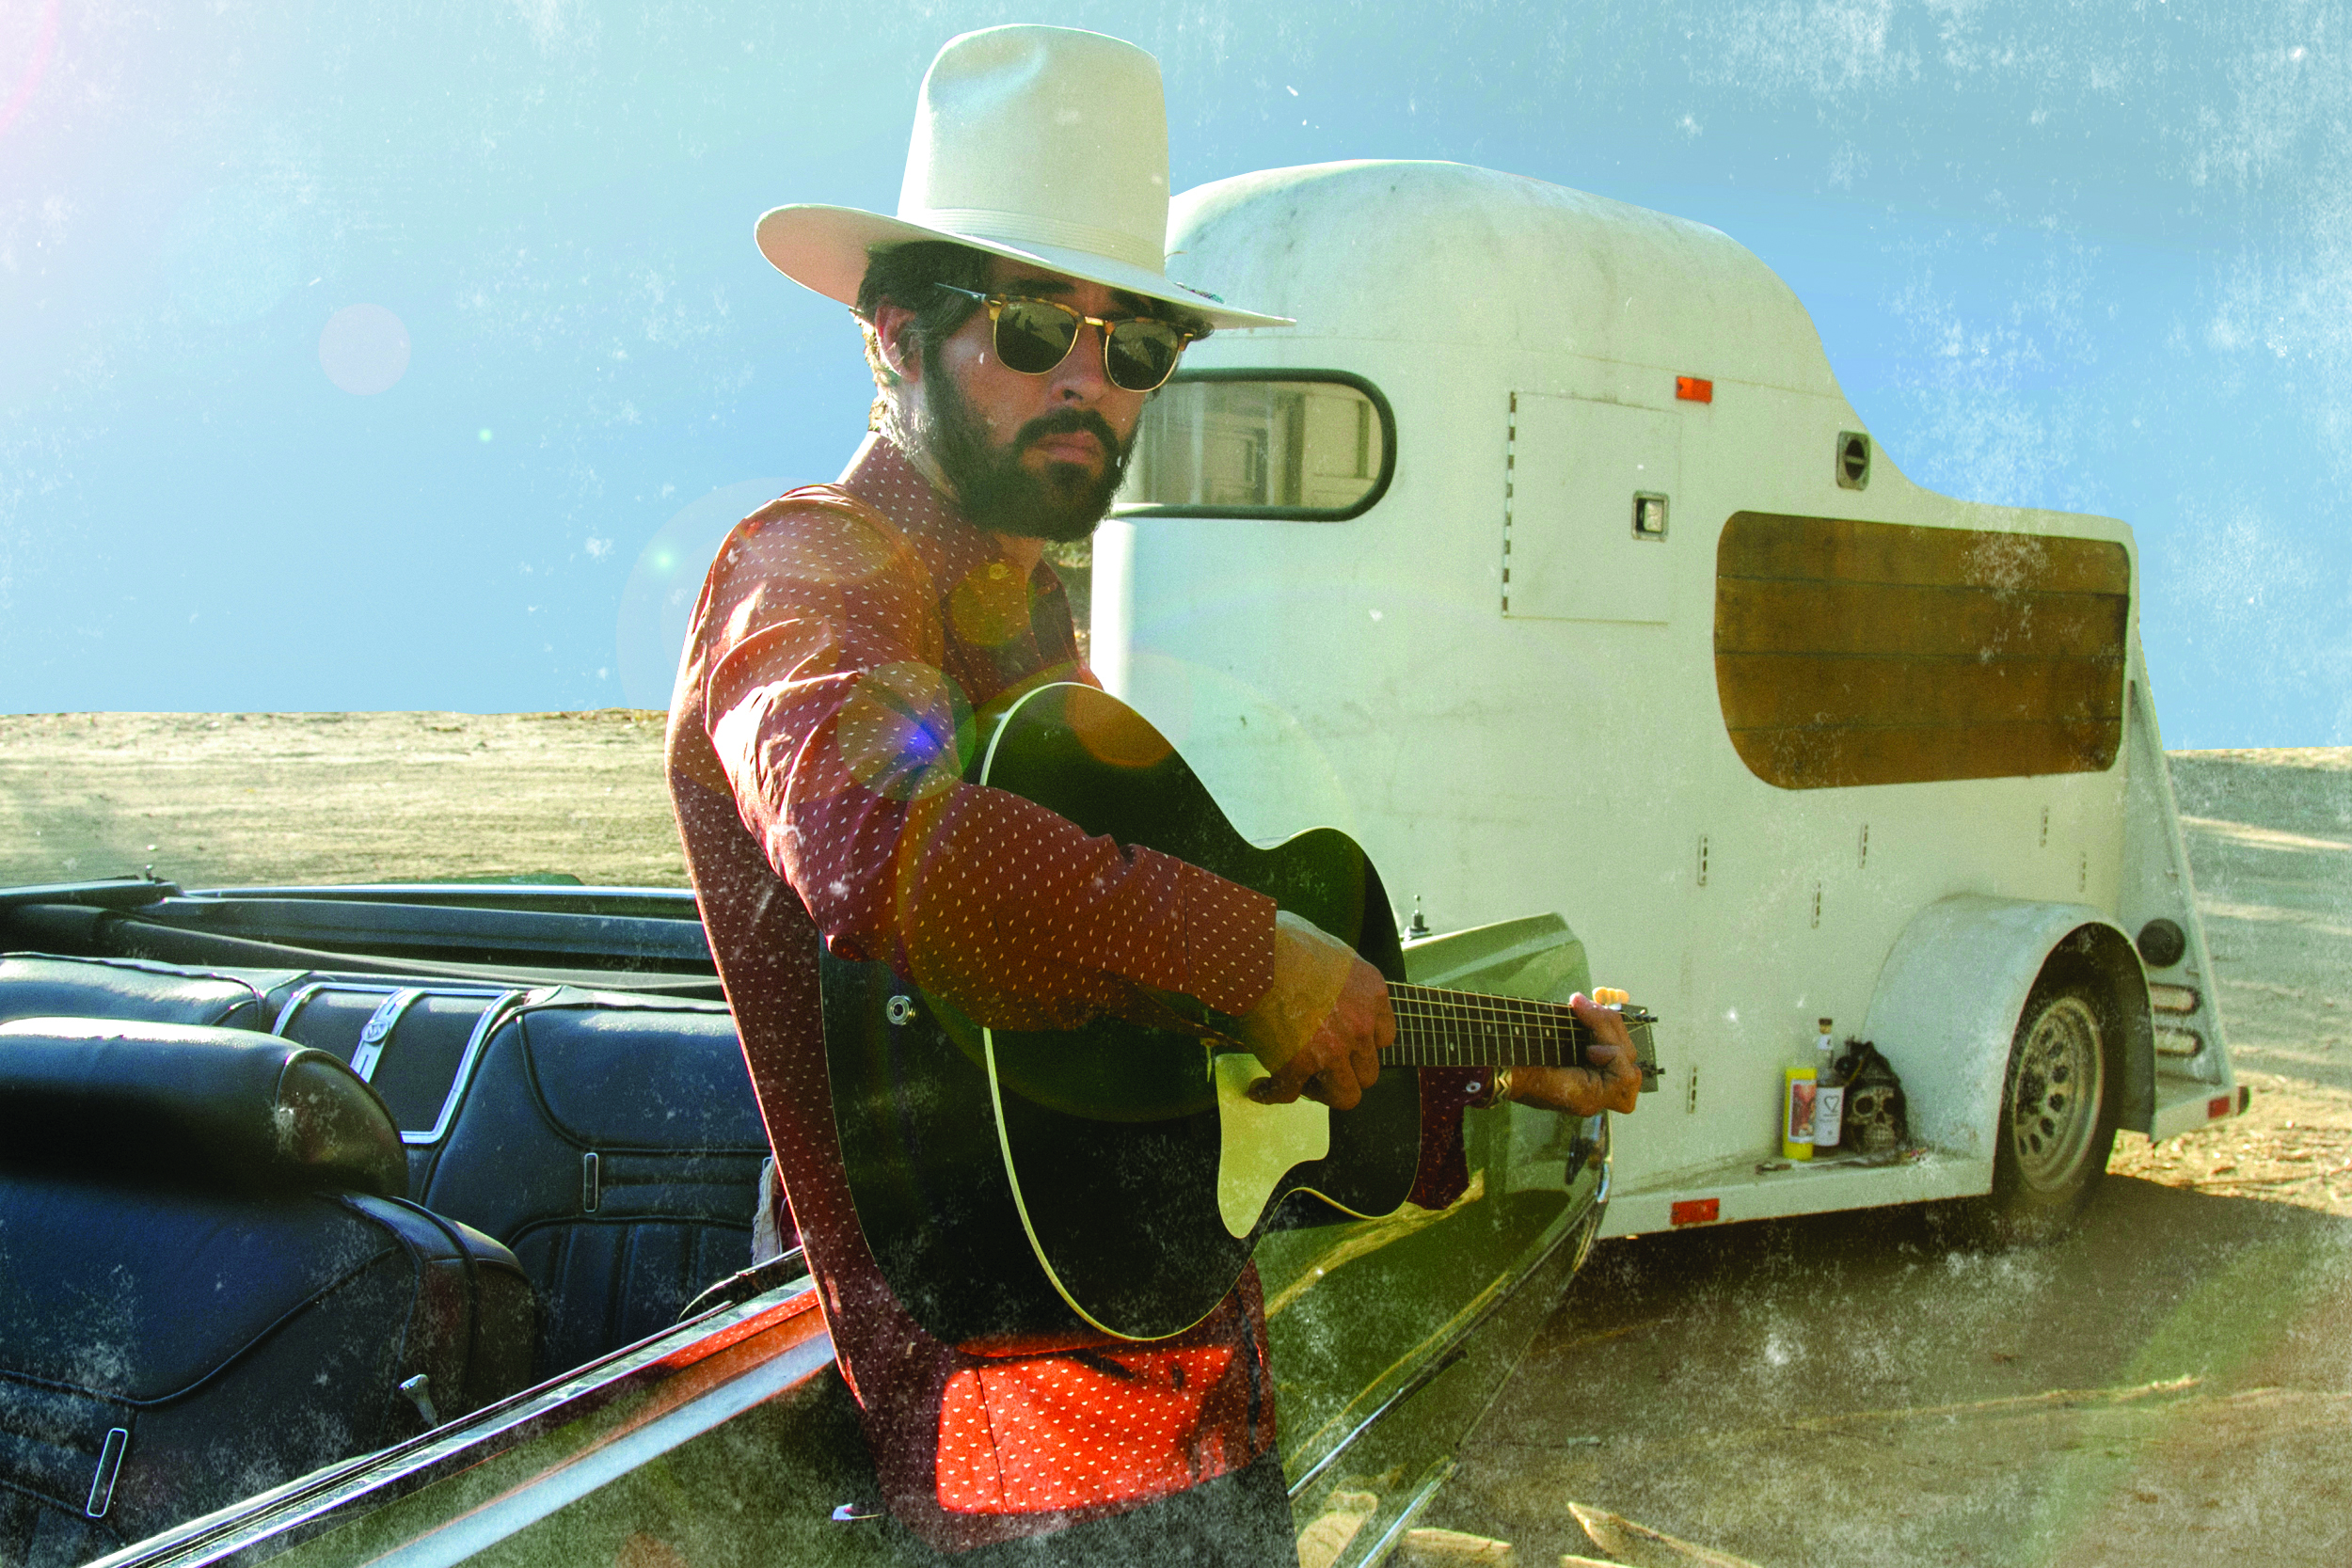 Holding a guitar and wearing sunglasses, Ryan Bingham stands in front of an old truck